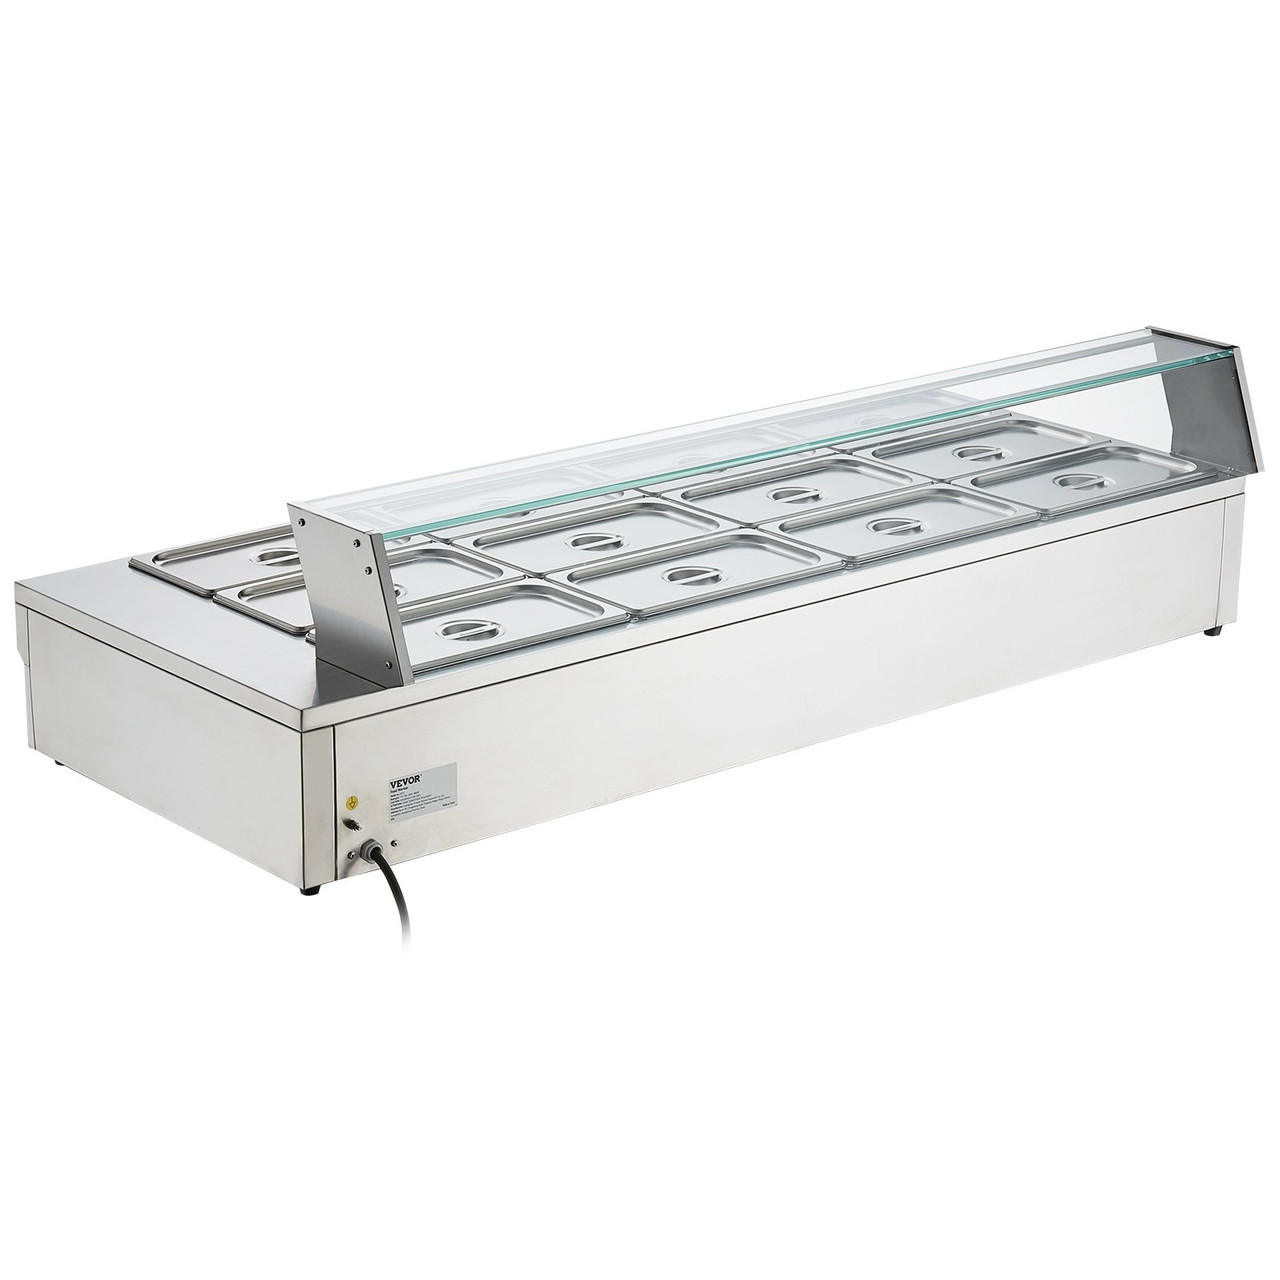 restaurant electric commercial food warmer glass